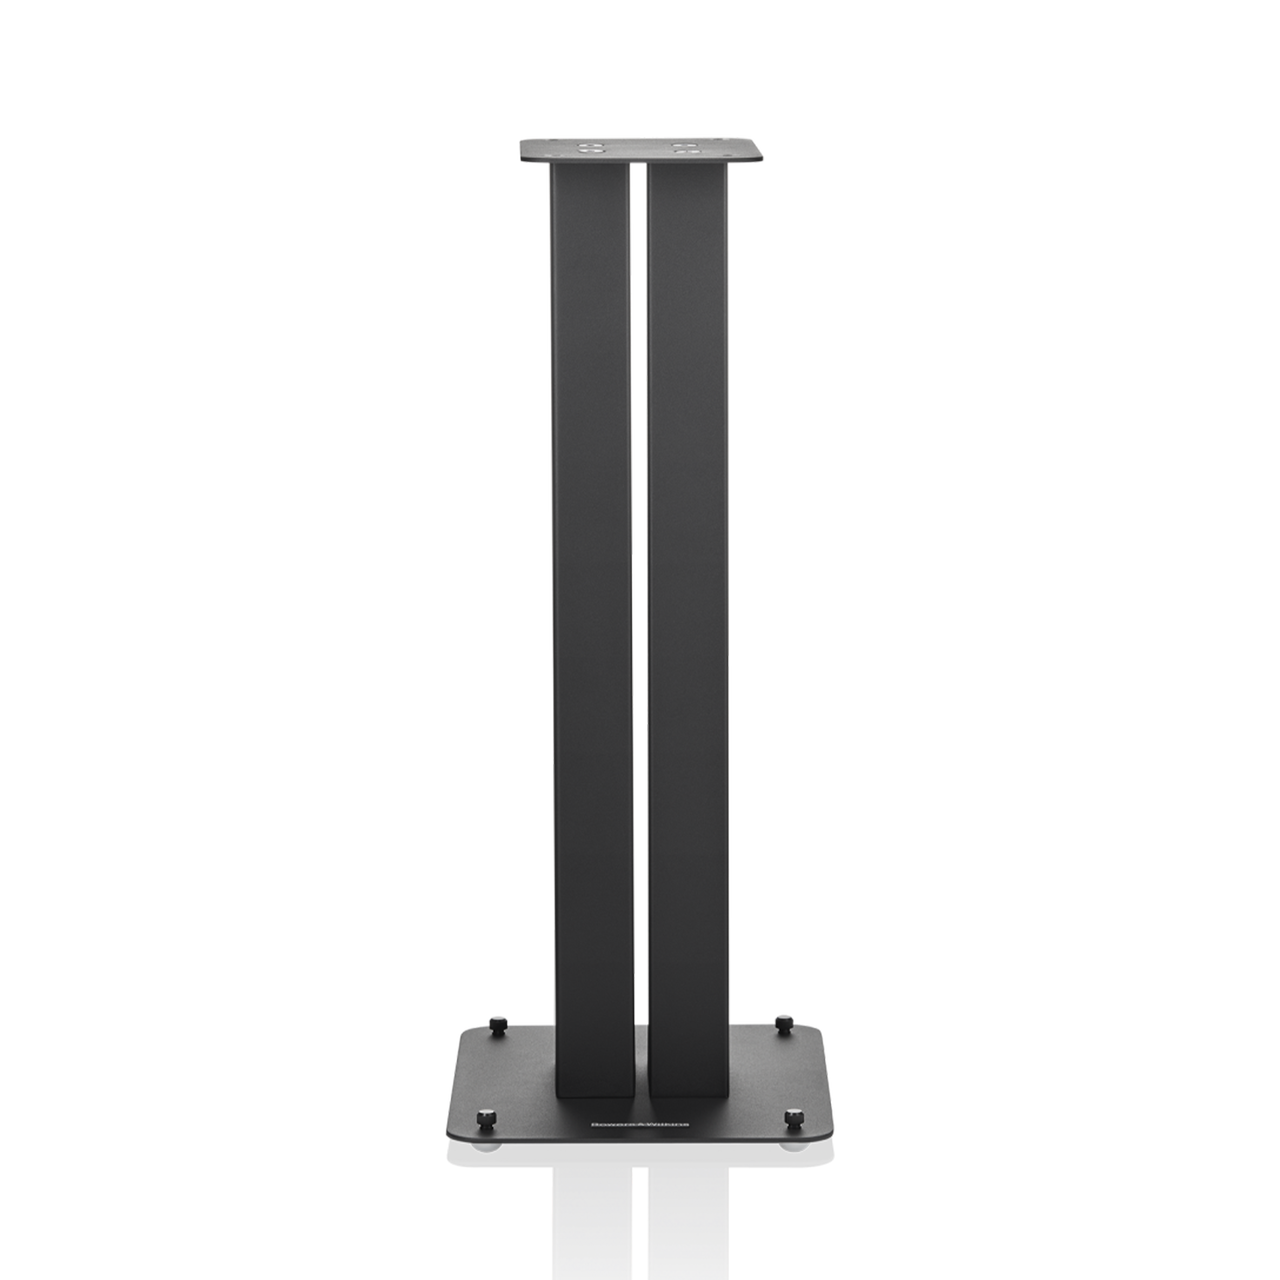 Bowers & Wilkins FS-600 S3 ( Stands for 600 S3 series)